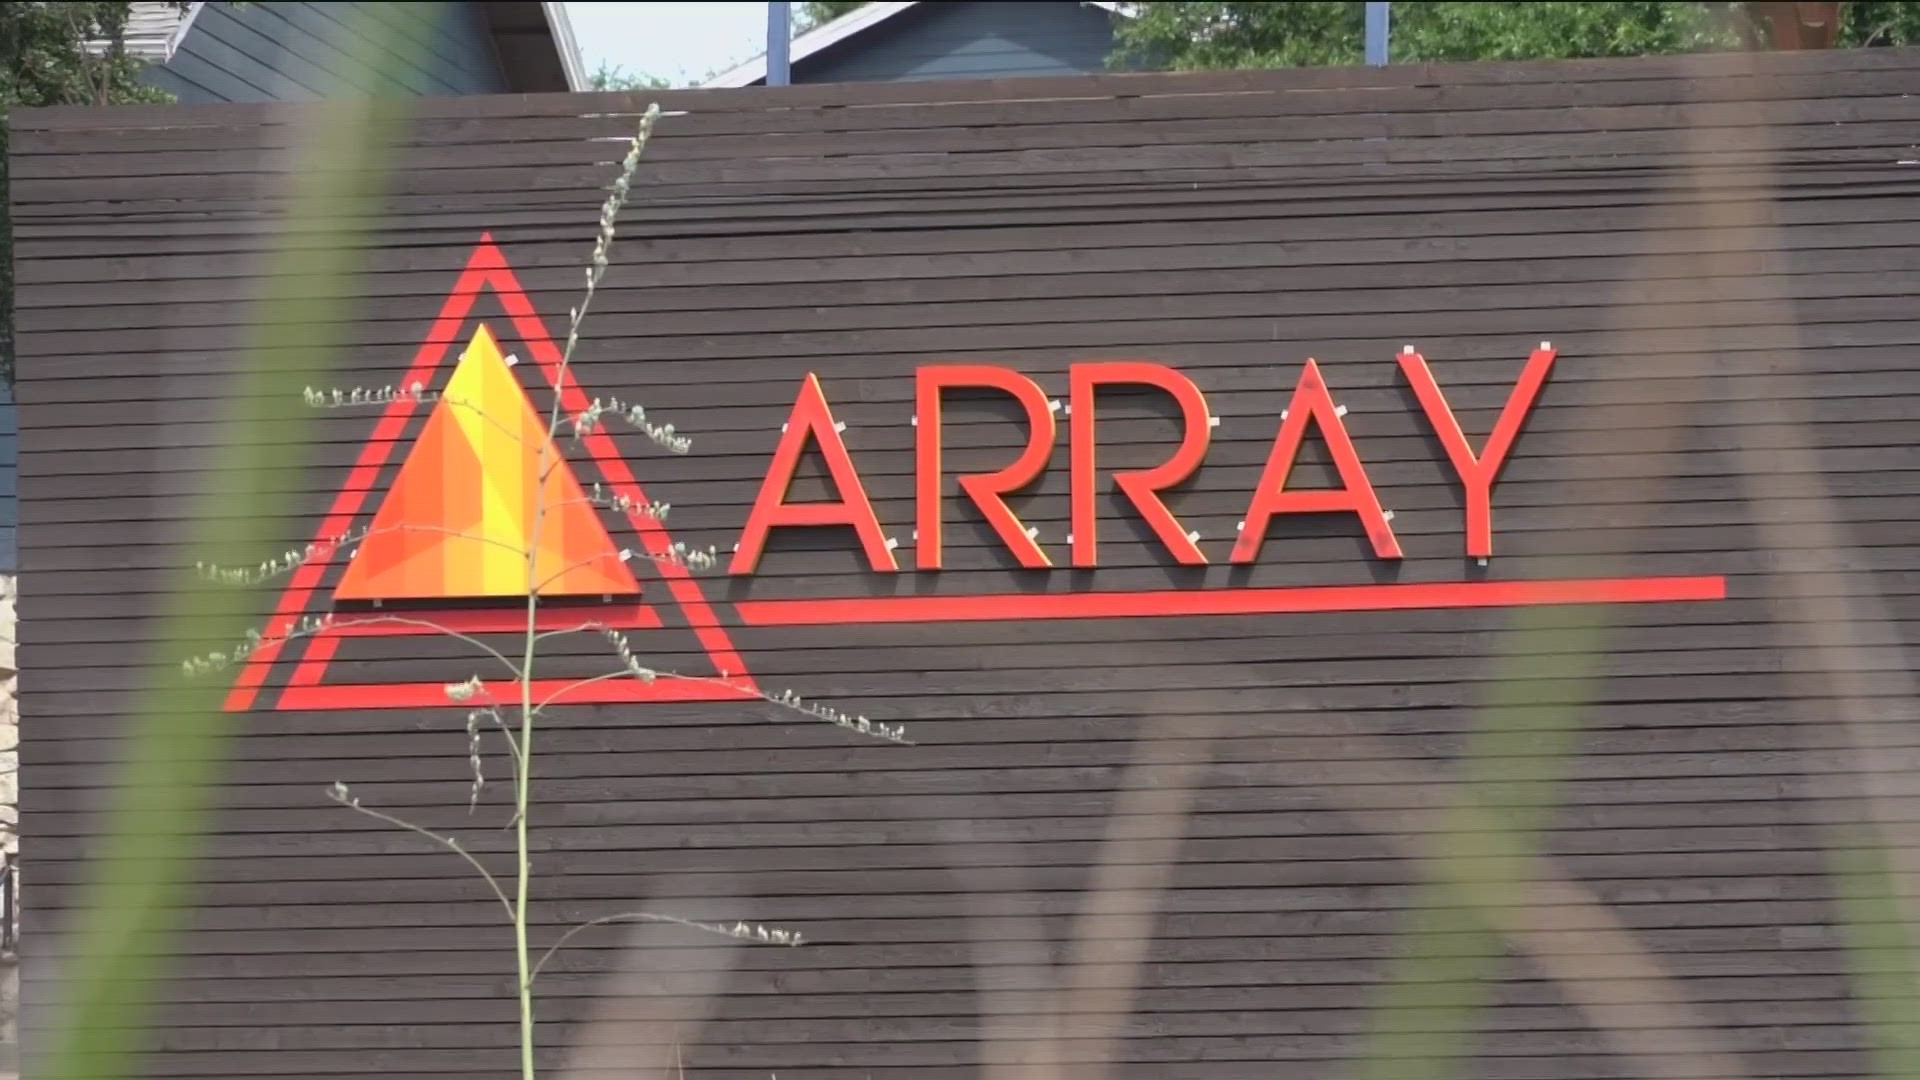 10 p.m. until 5 a.m. is the new  curfew for people living at the Array Apartments in Southeast Austin, during which they aren't allowed to leave their homes.